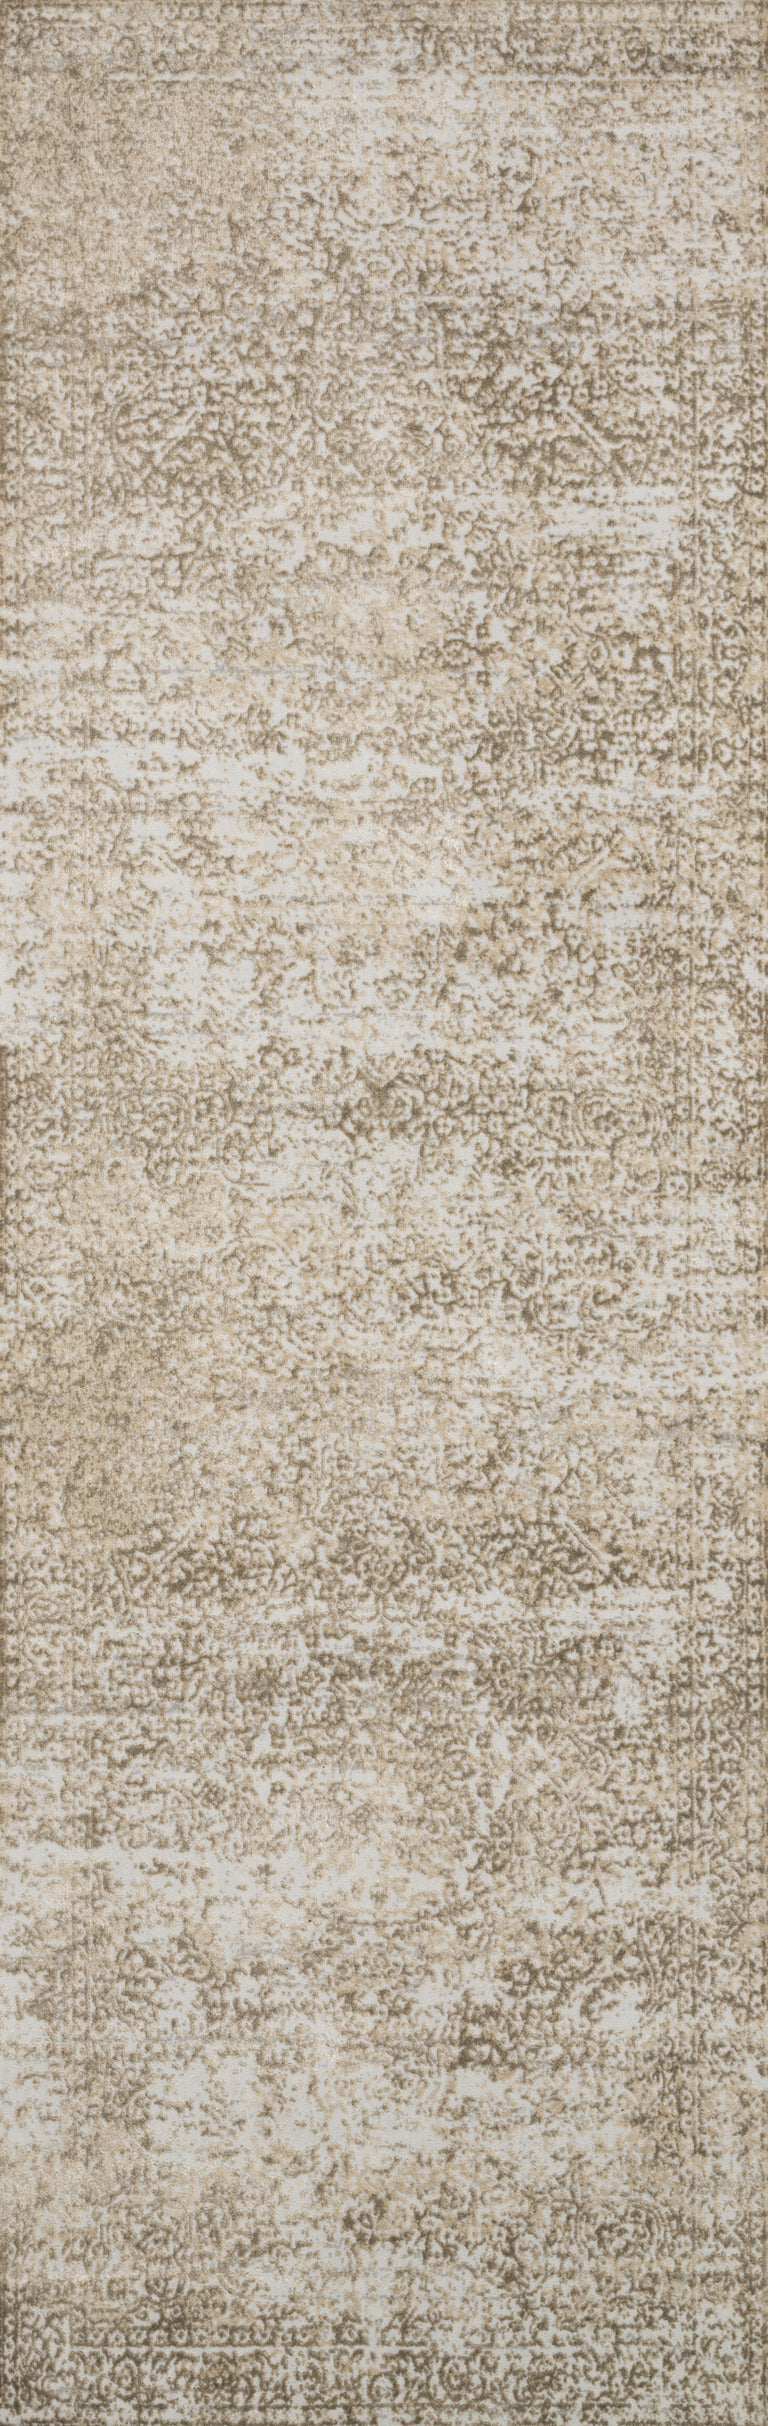 Loloi Rugs Patina Collection Rug in Champagne, Lt. Grey - 7'10" x 7'10"